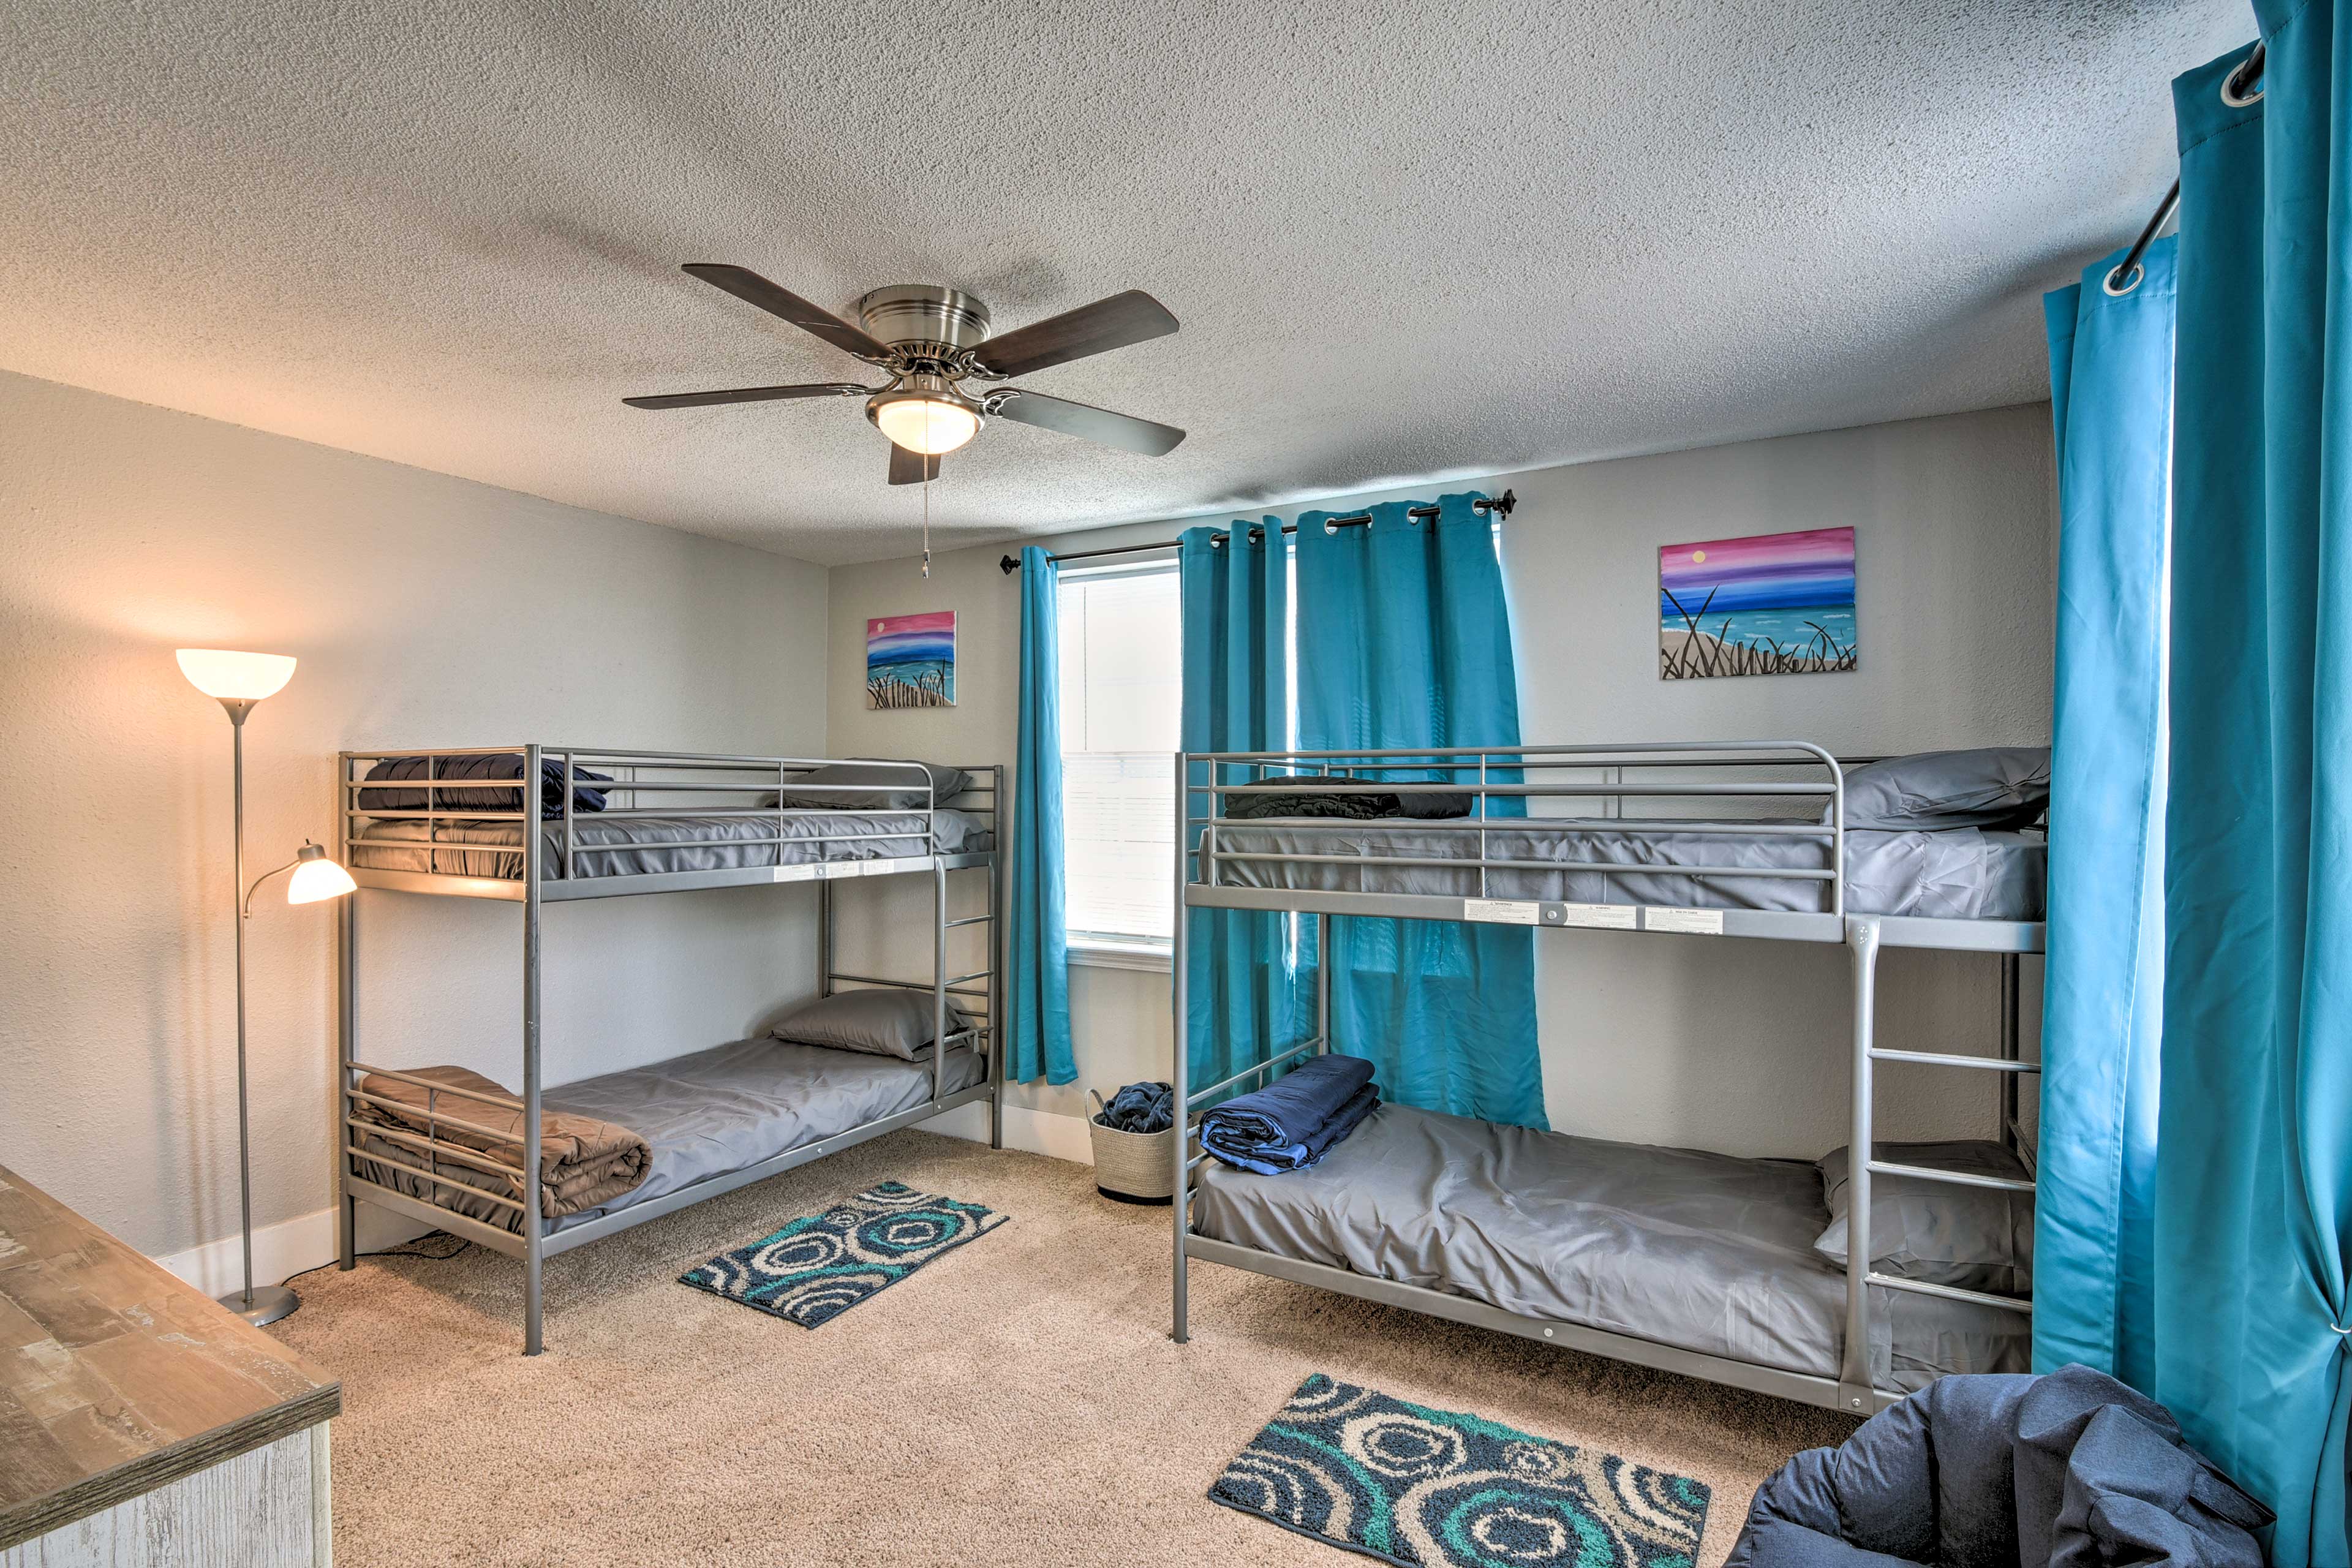 Bedroom 2 | 2 Twin Bunk Beds | Smart TV w/ Cable